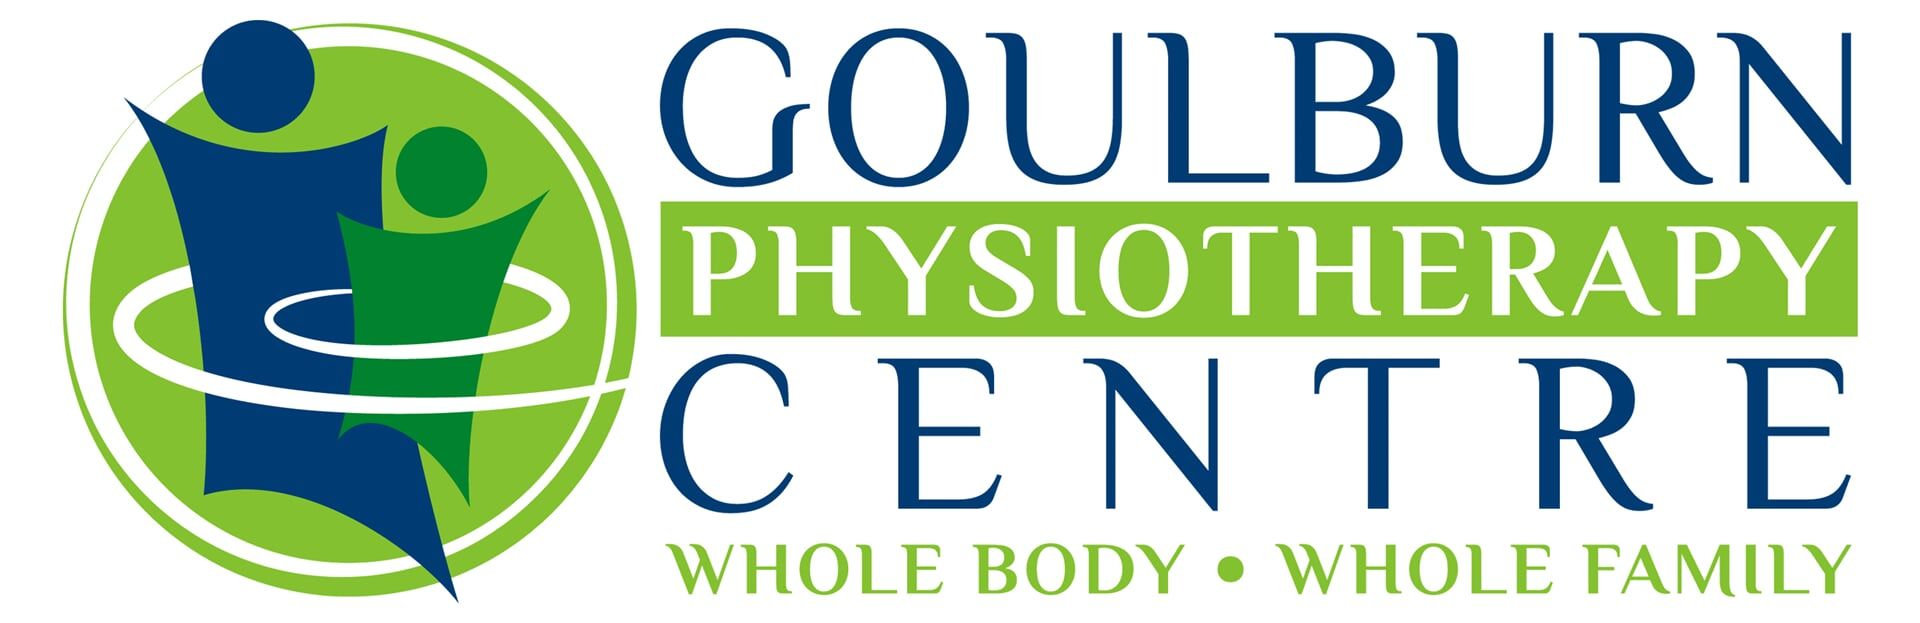 Physiotherapists in Goulburn